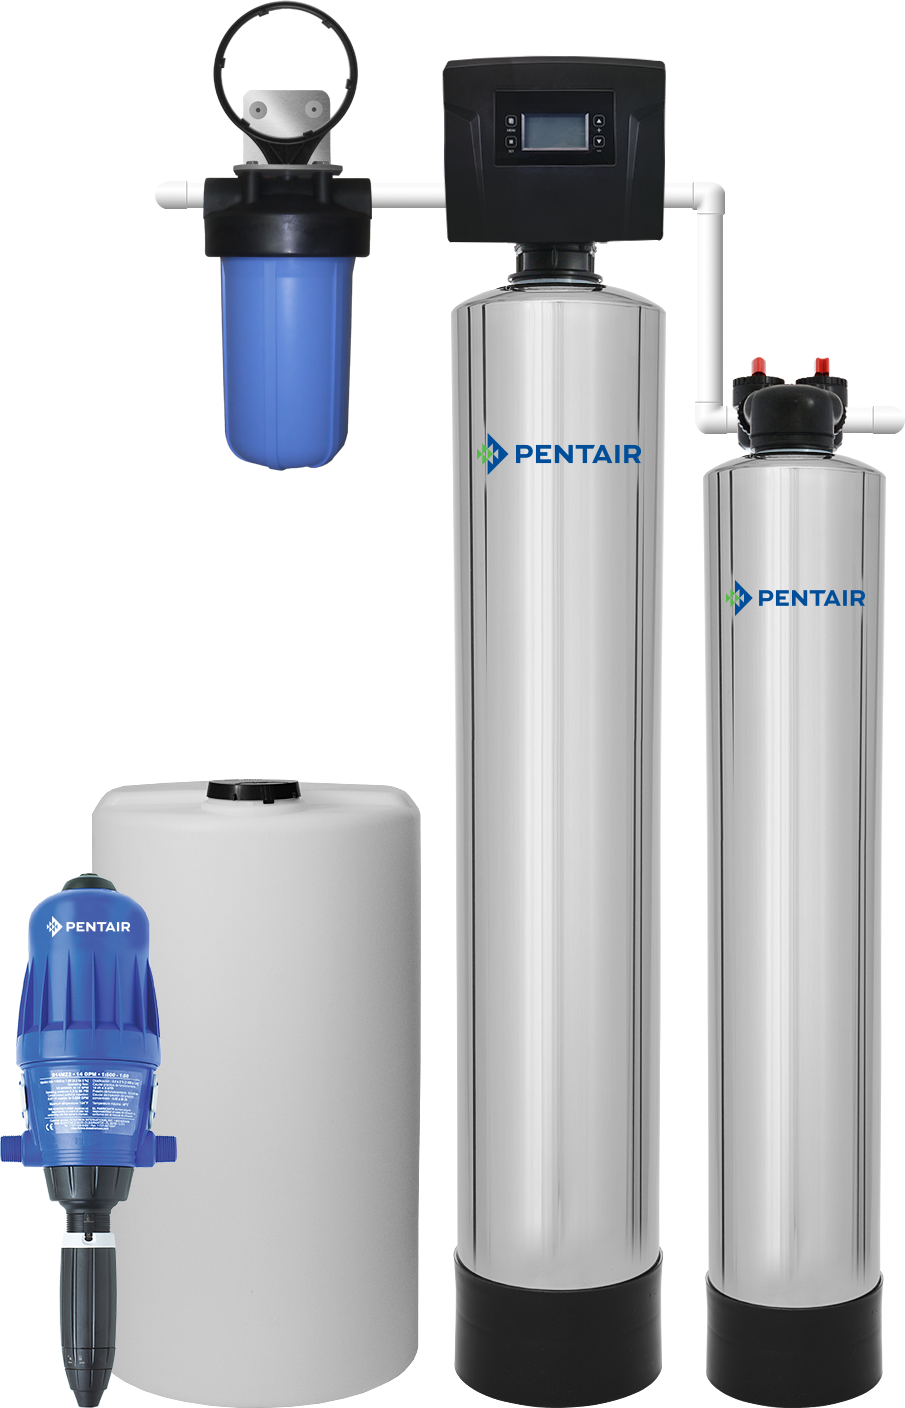 wf4-p wf8-p iron and manganese water filter with prefilter